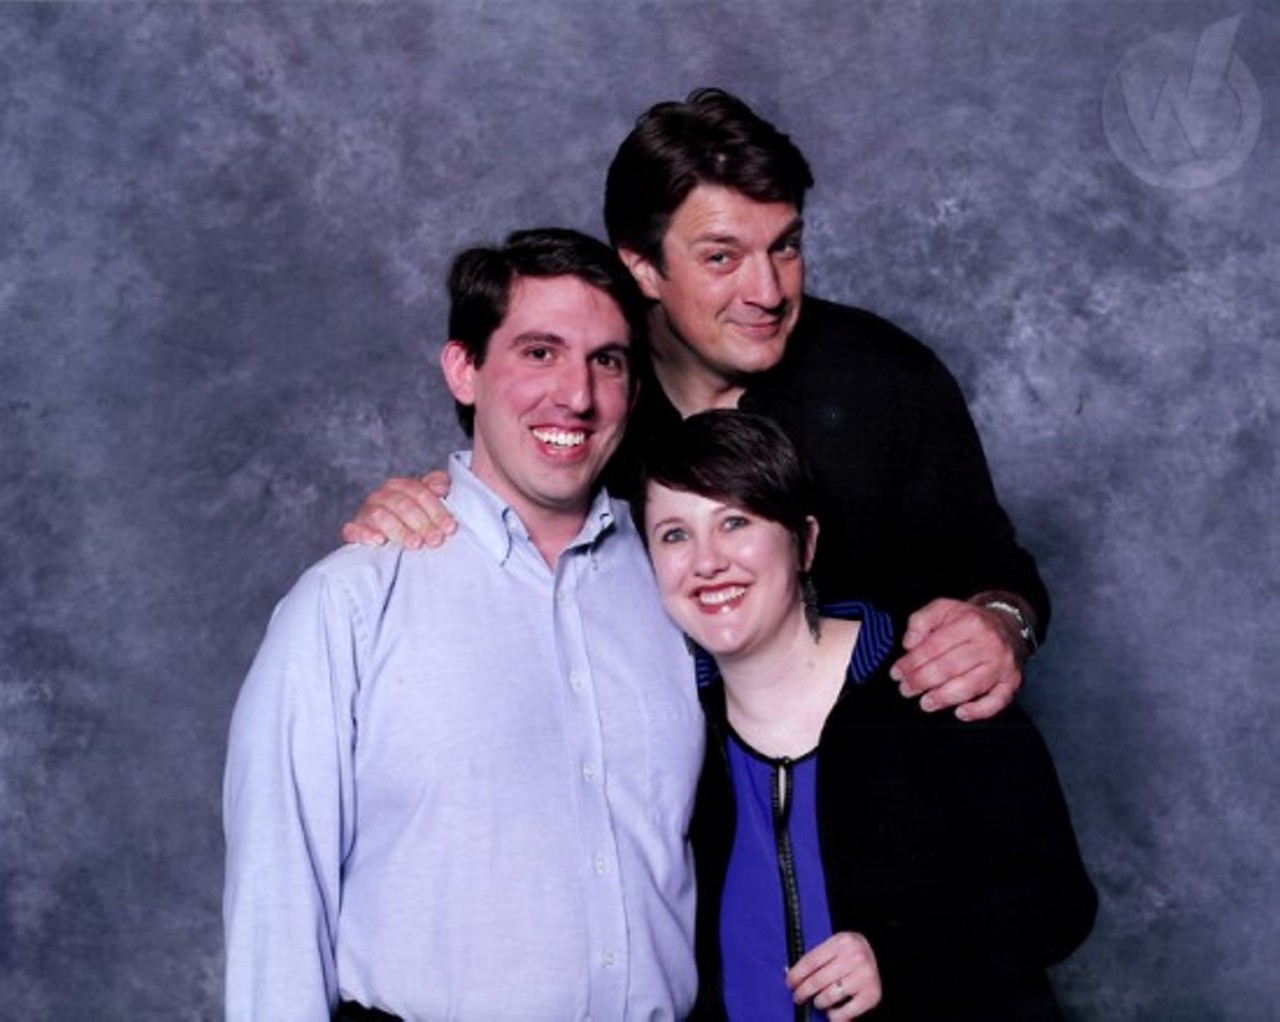 Nathan Fillion Unwittingly Helps Local Nerds Get Engaged at Wizard World. See more photos here.